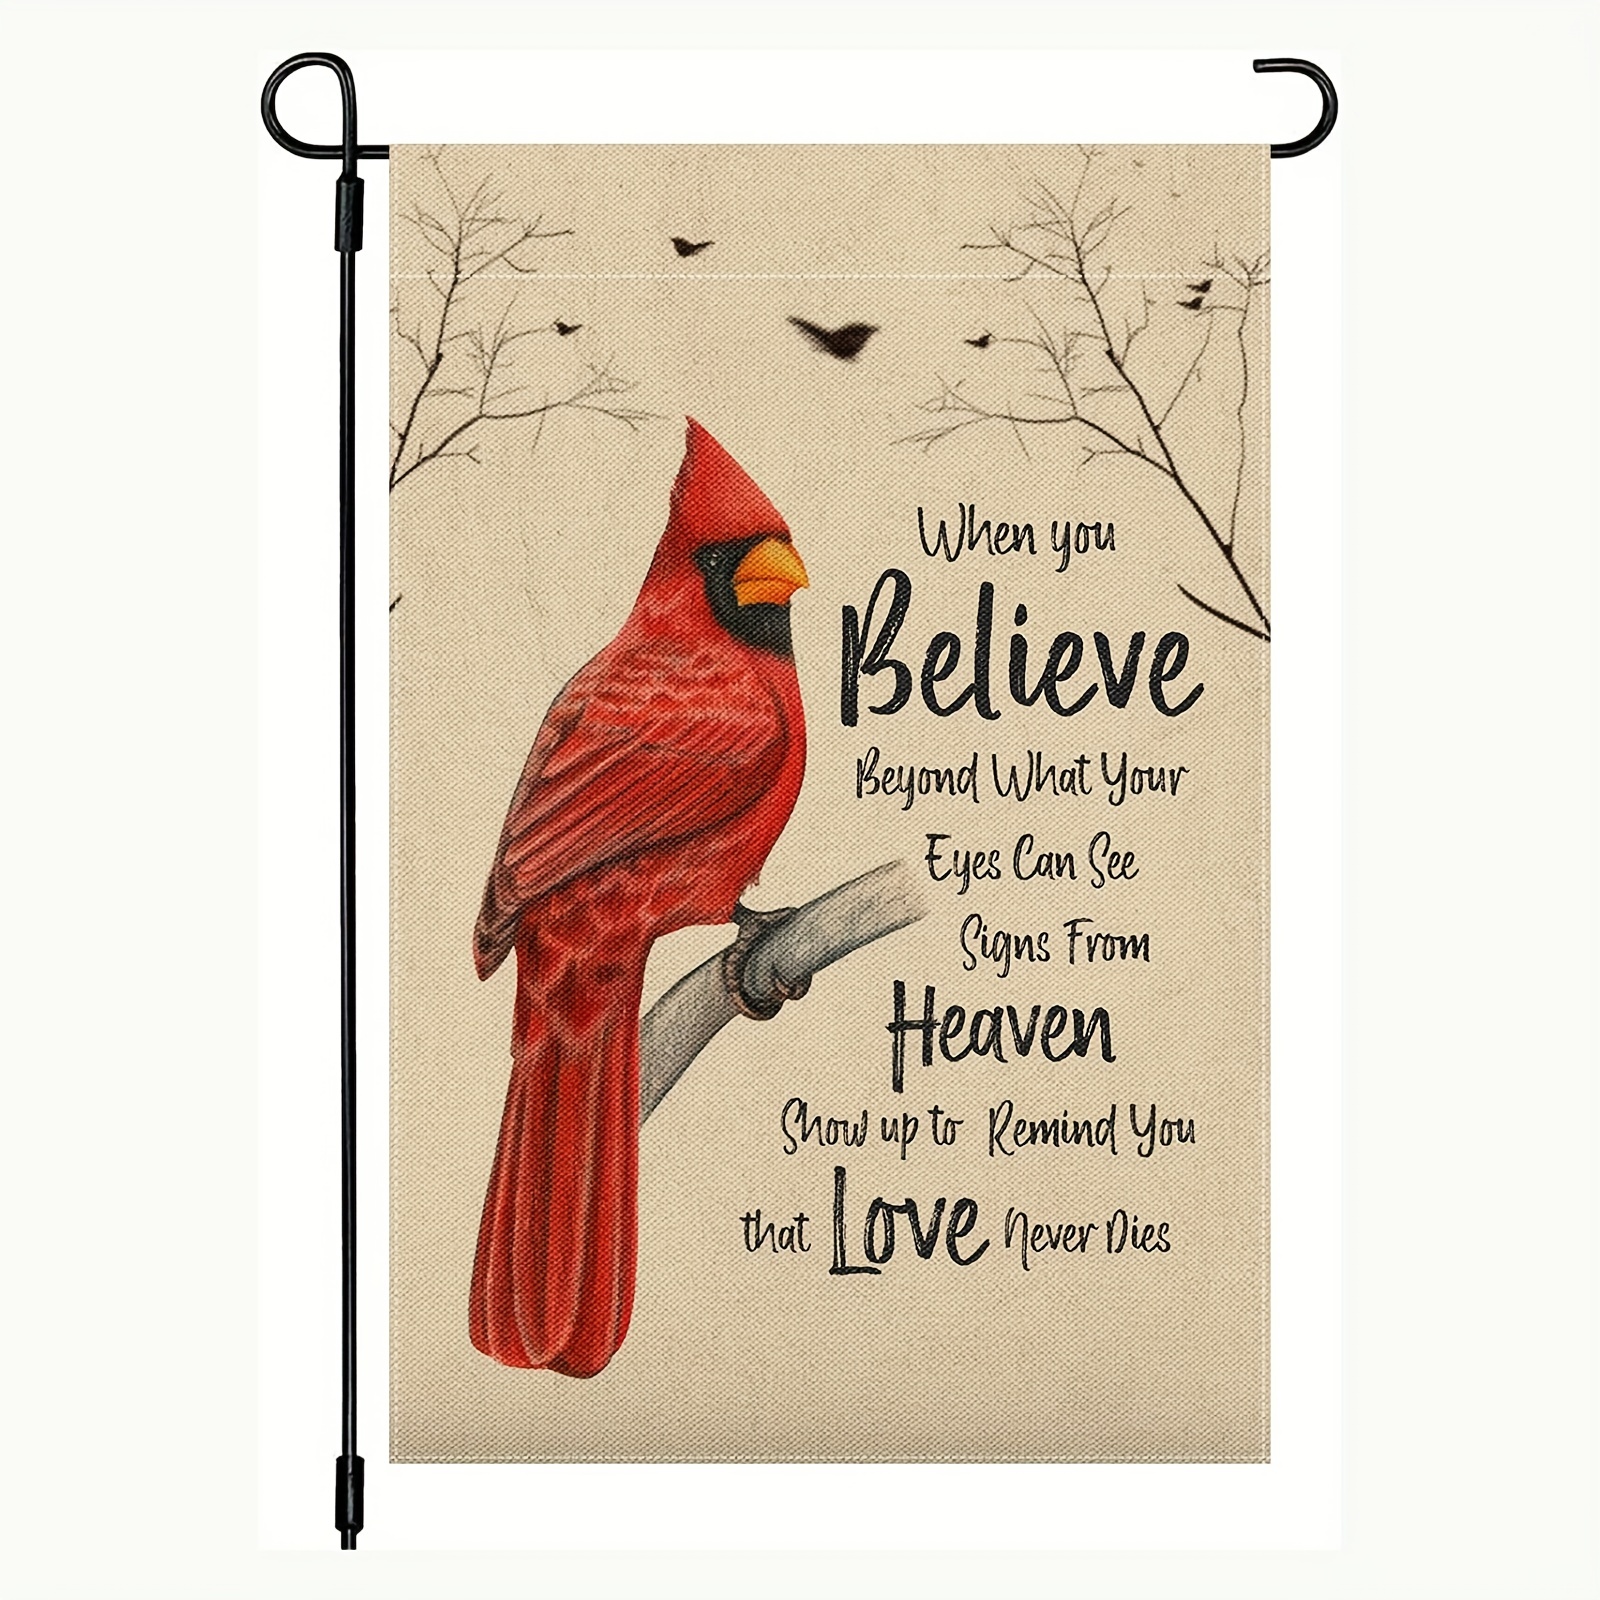 

1pc Garden Flag Farmhouse Burlap Yard Outdoor Decor Signs, From Heaven Show Up To Remind You That Love Never Dies (no Metal Brace) 12x18 Inch Easter Gift